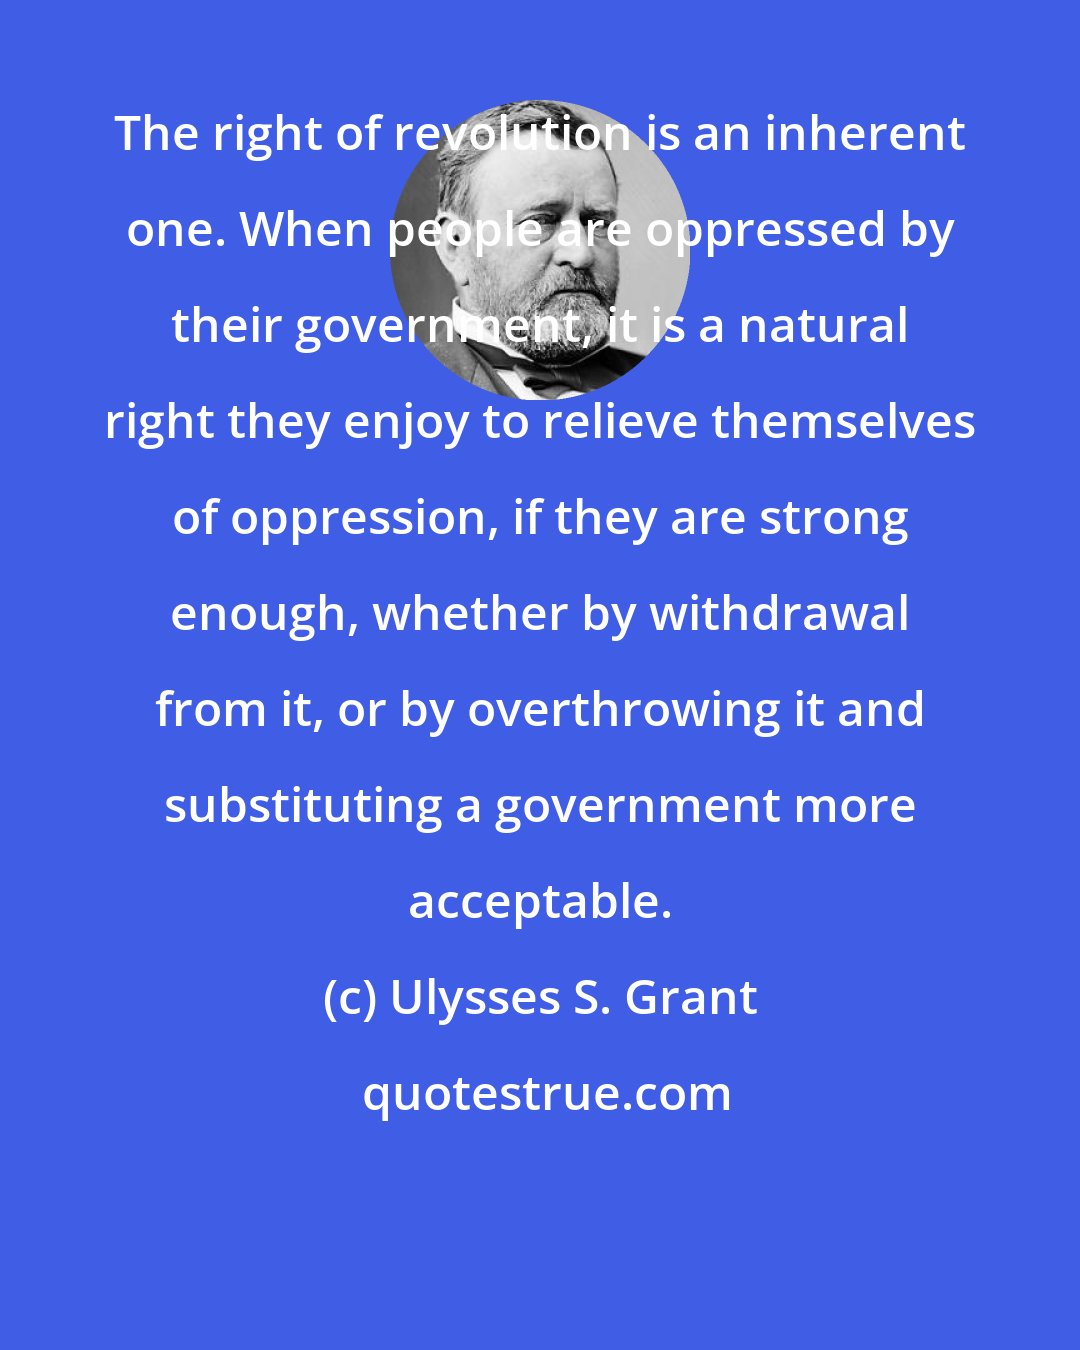 Ulysses S. Grant: The right of revolution is an inherent one. When people are oppressed by their government, it is a natural right they enjoy to relieve themselves of oppression, if they are strong enough, whether by withdrawal from it, or by overthrowing it and substituting a government more acceptable.